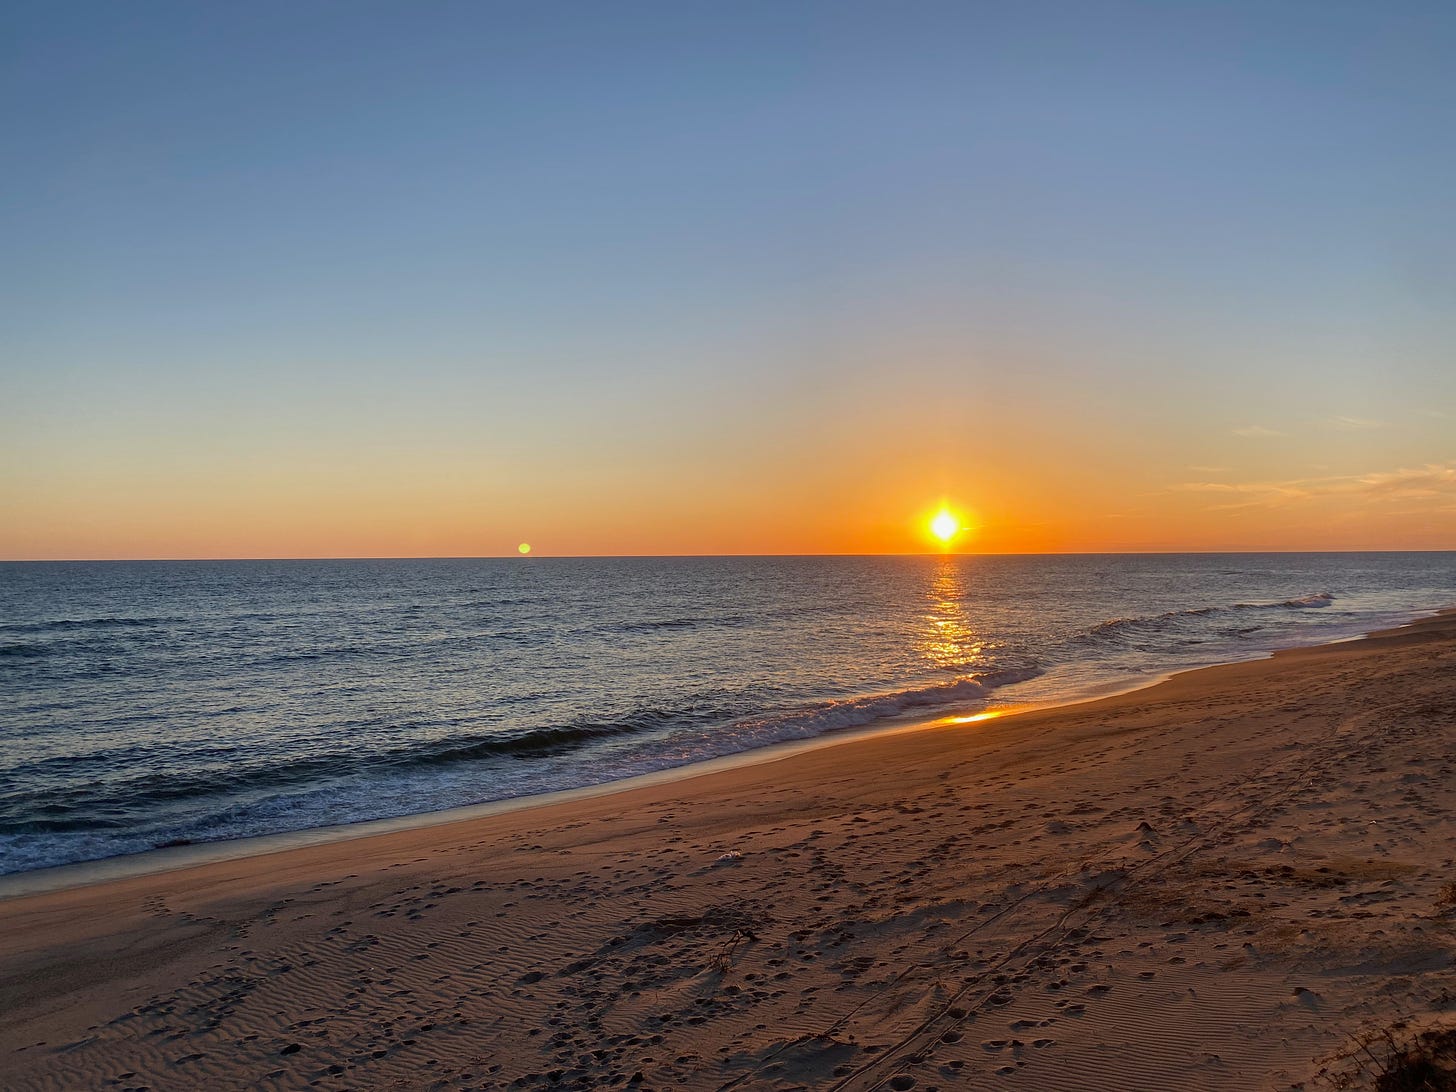 A beach at sunset. The ocean is still, the sky a clear, deep blue, and the golden sun is low on the horizon, reflecting on the ocean and in the breaking waves.